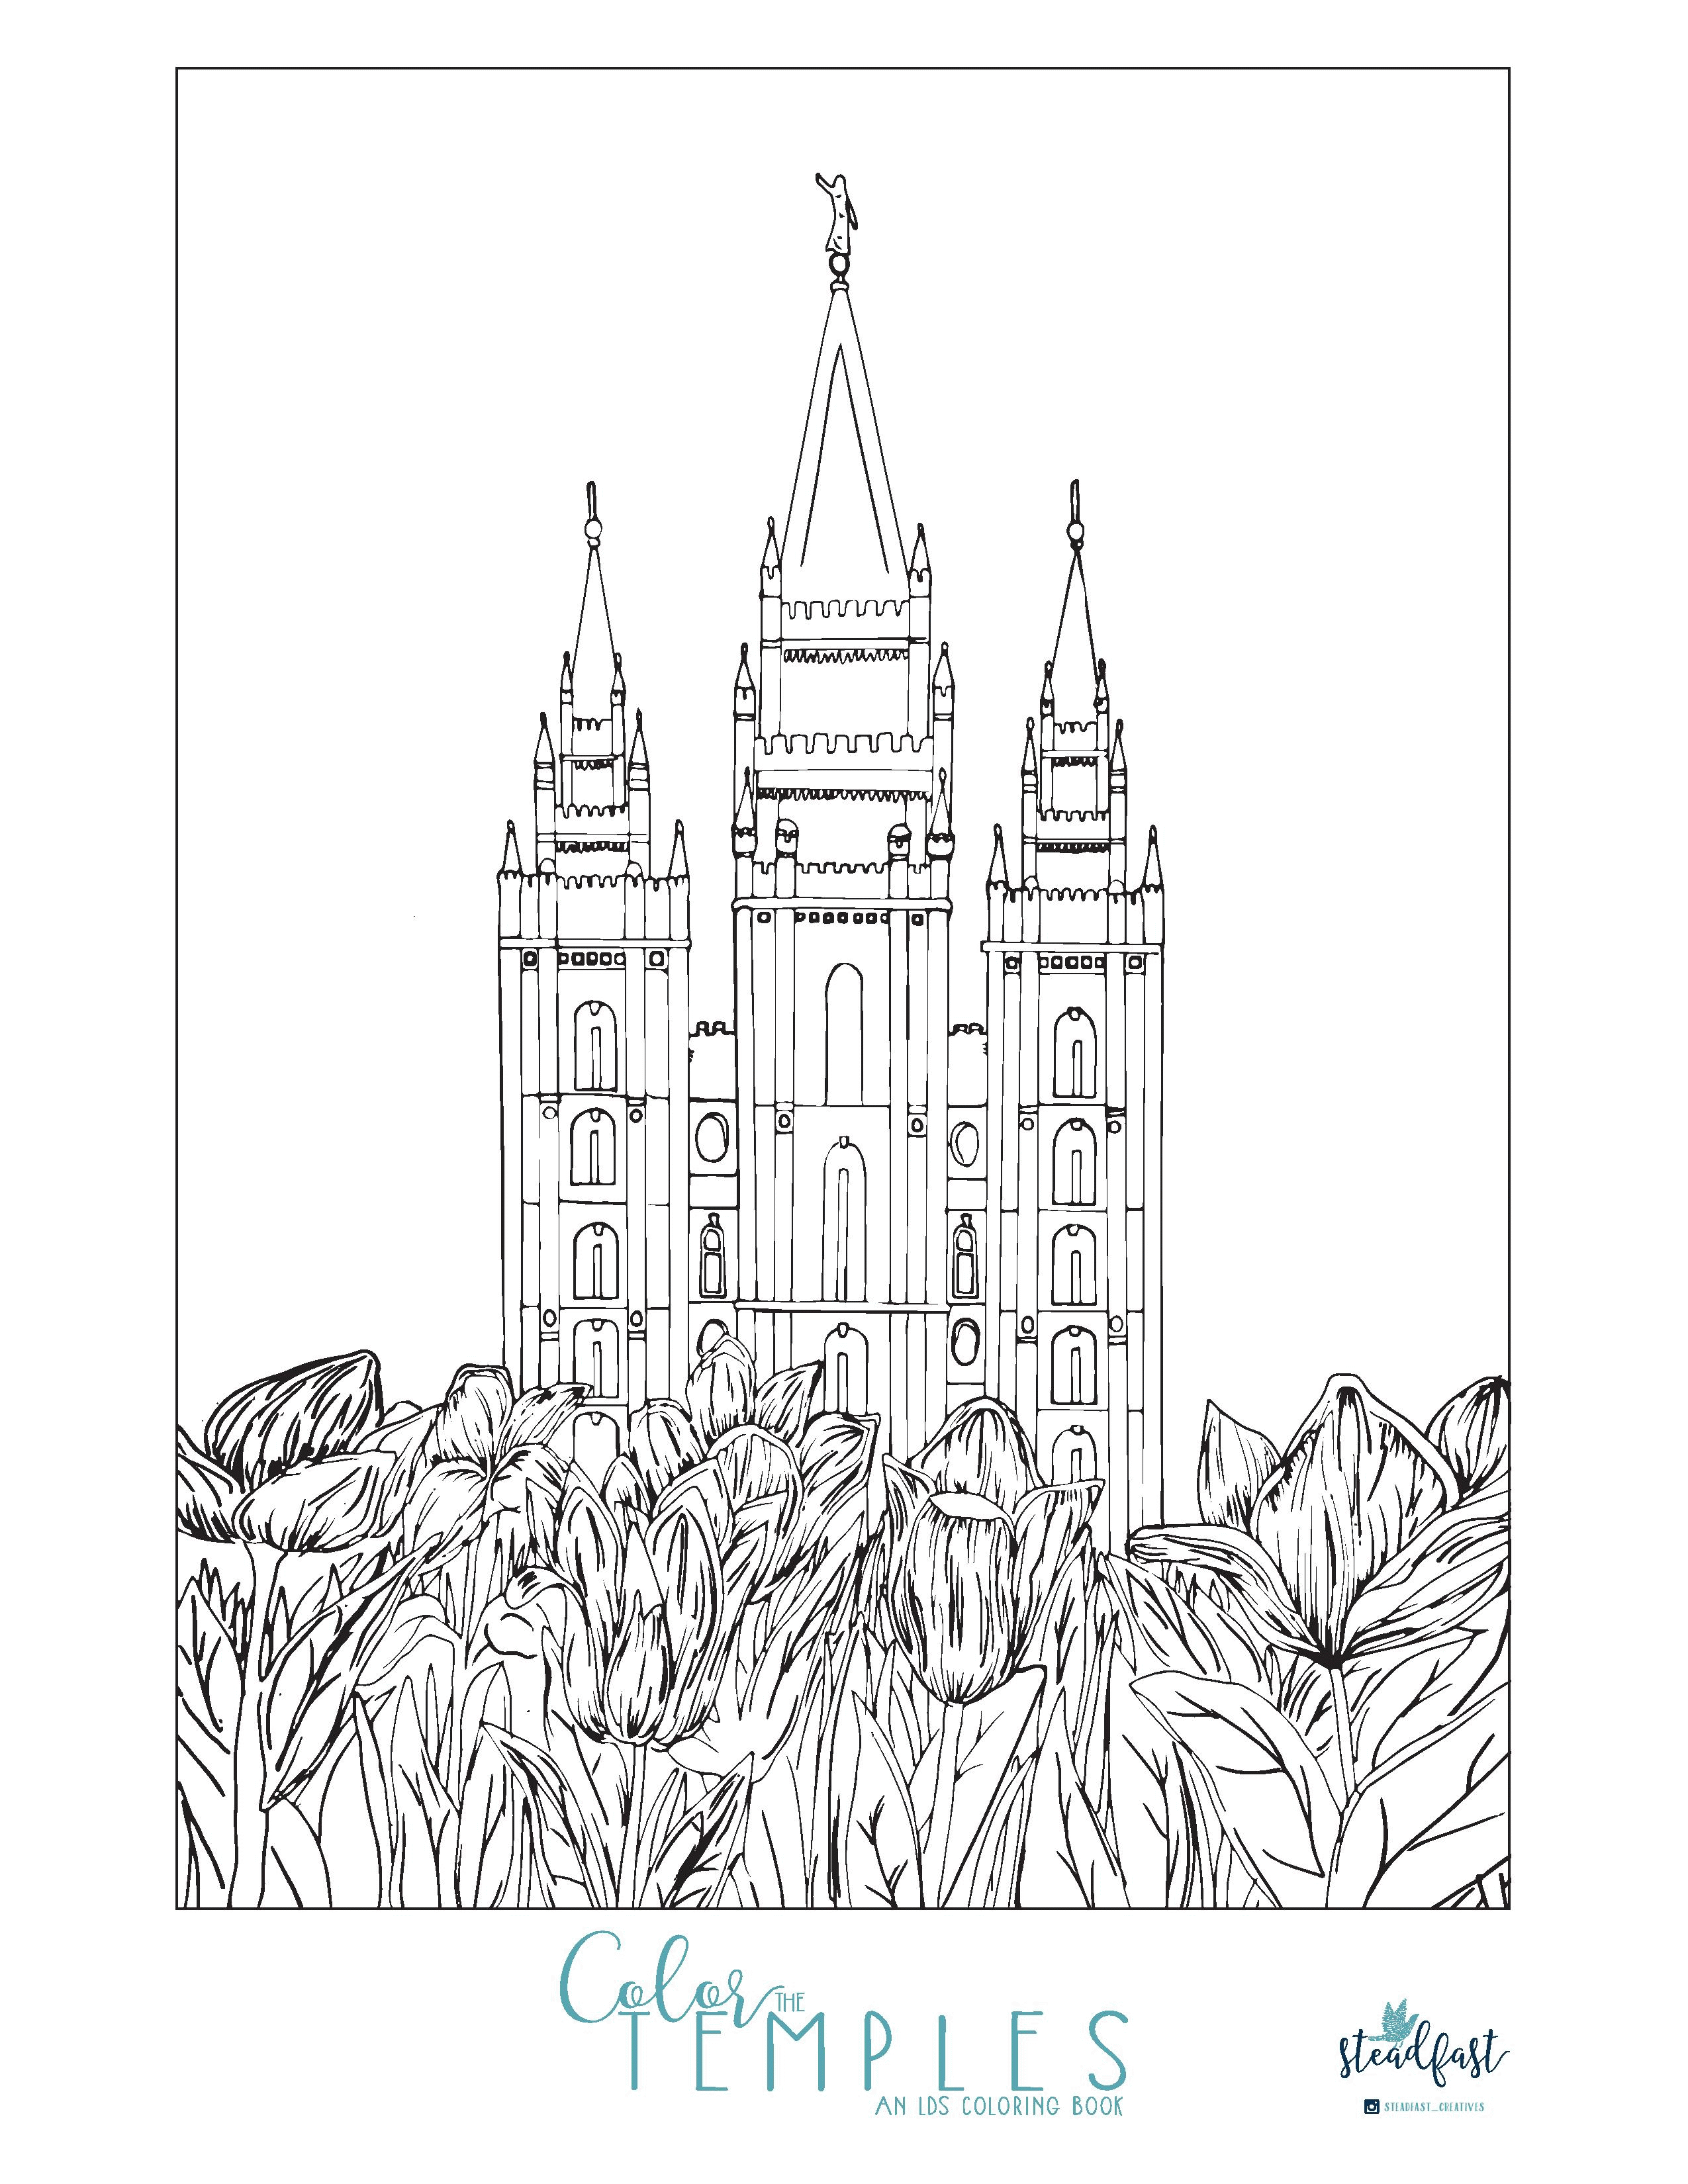 171 Simple Lds Temple Coloring Pages for Adult